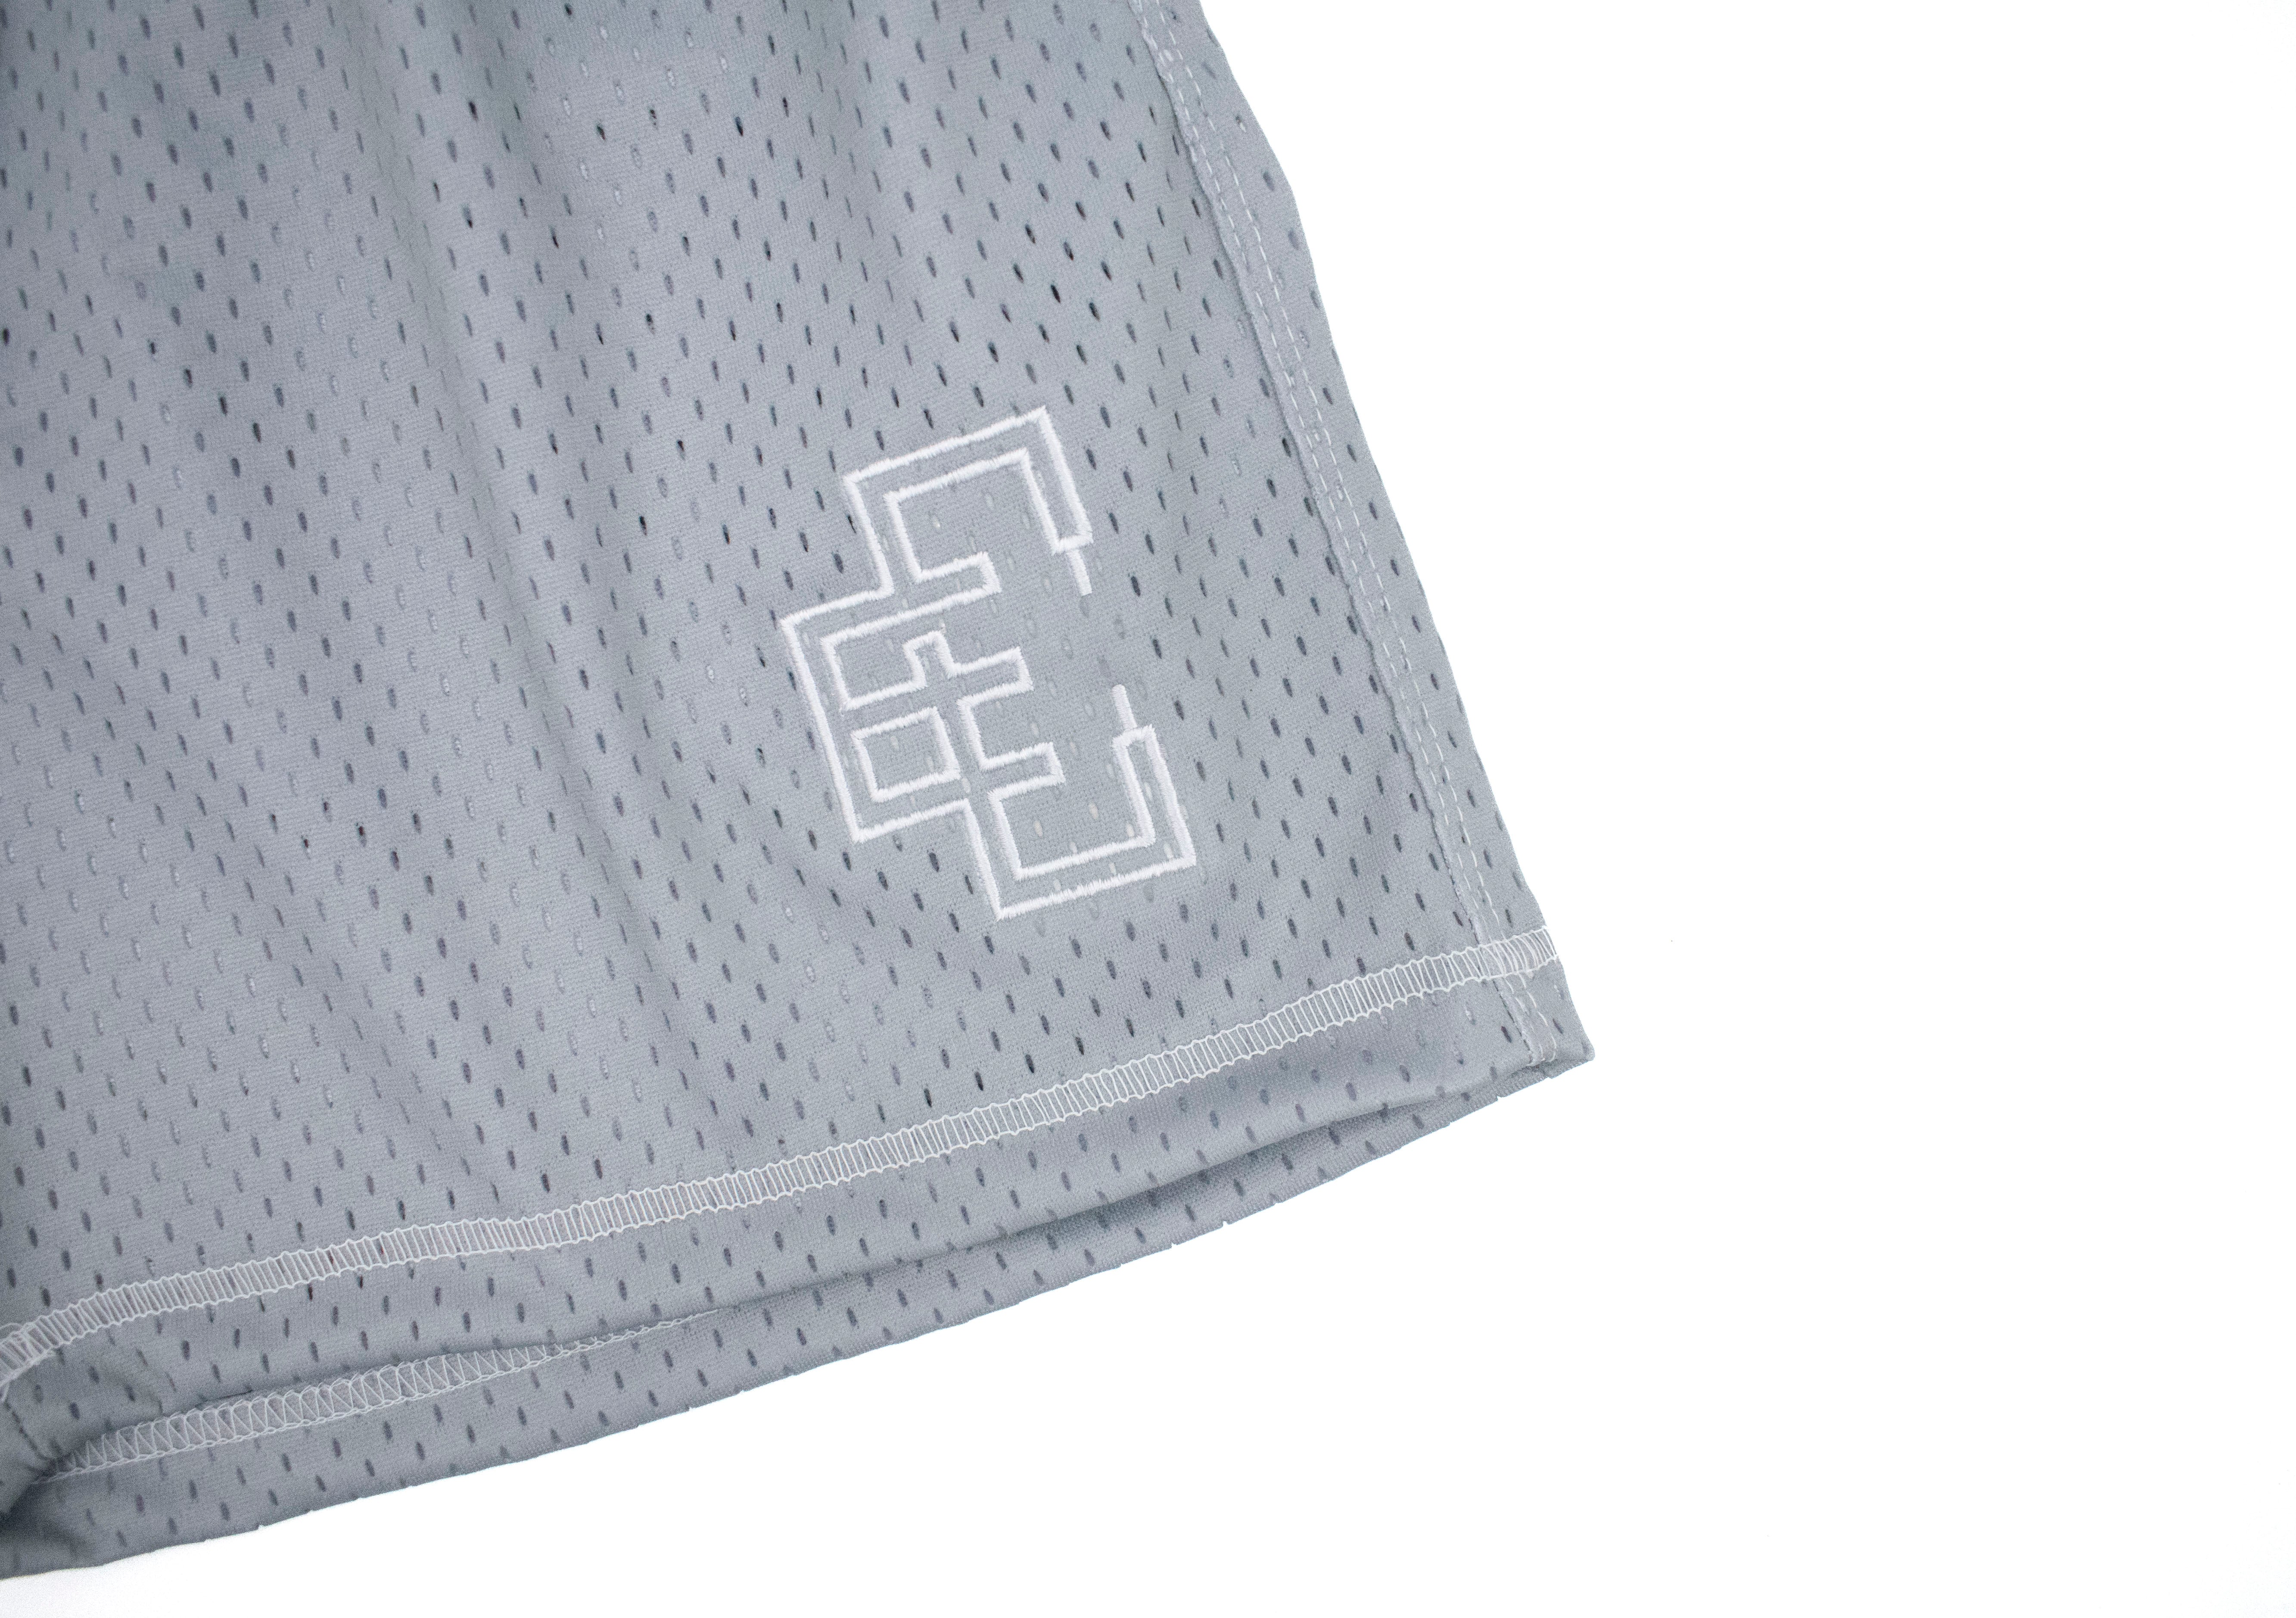 Copped Contrast Mesh Shorts "Grey"